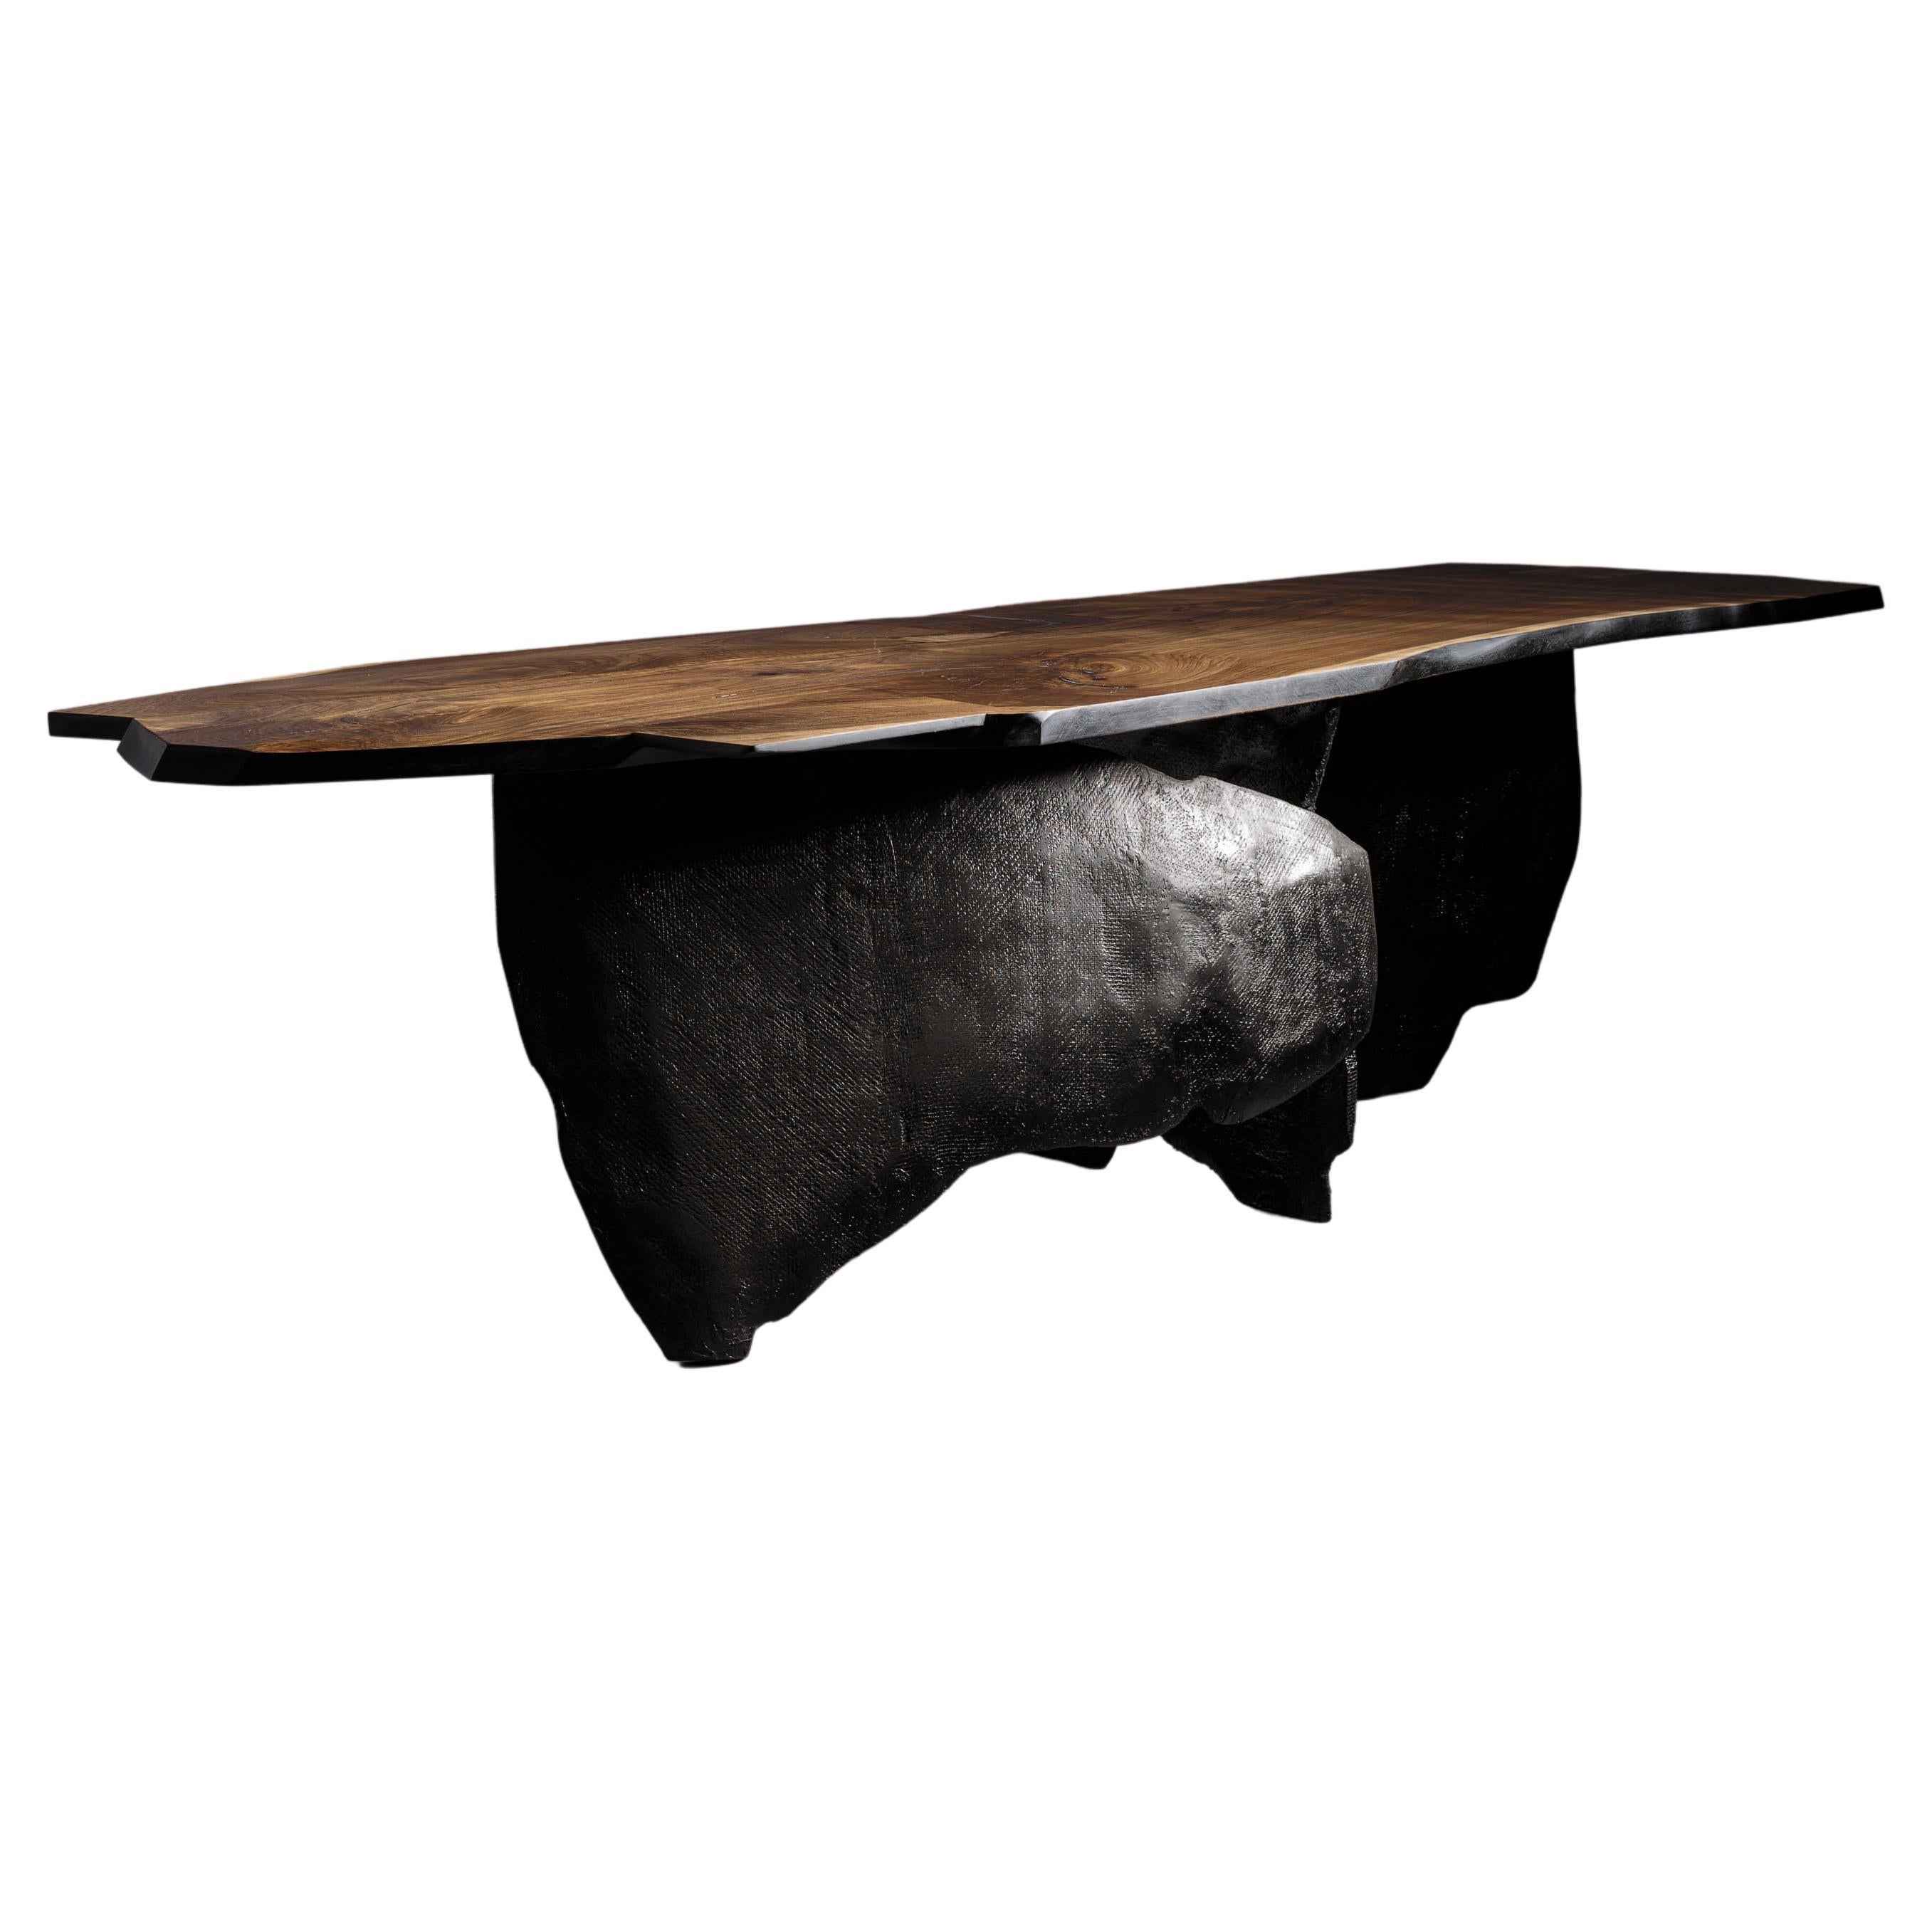 Eero Moss Walnut Sculptural Dining Table, EM204 For Sale